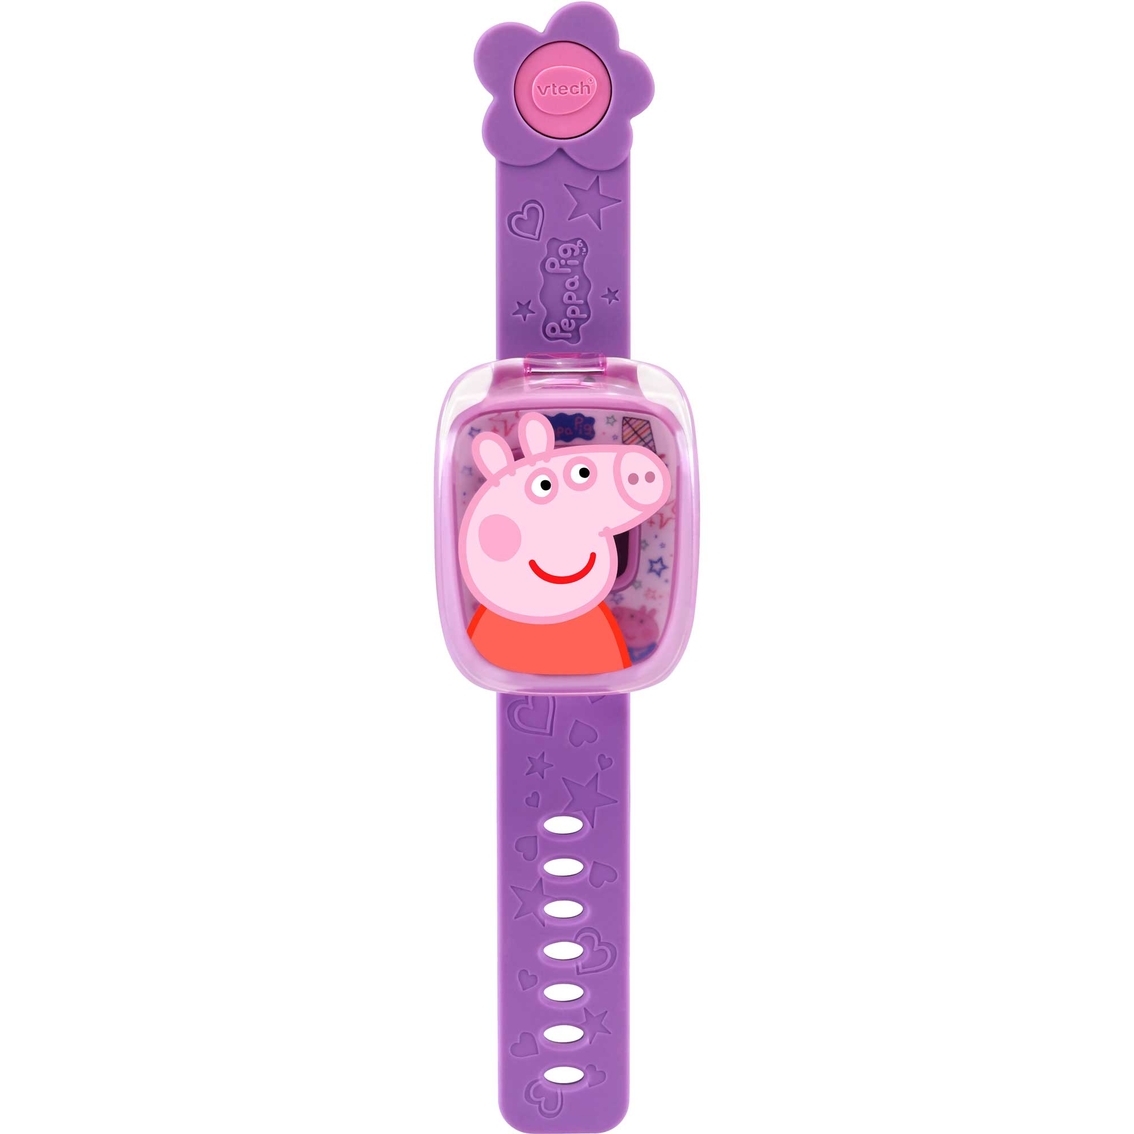 VTech Peppa Pig Learning Watch 80-526000 - Image 3 of 5